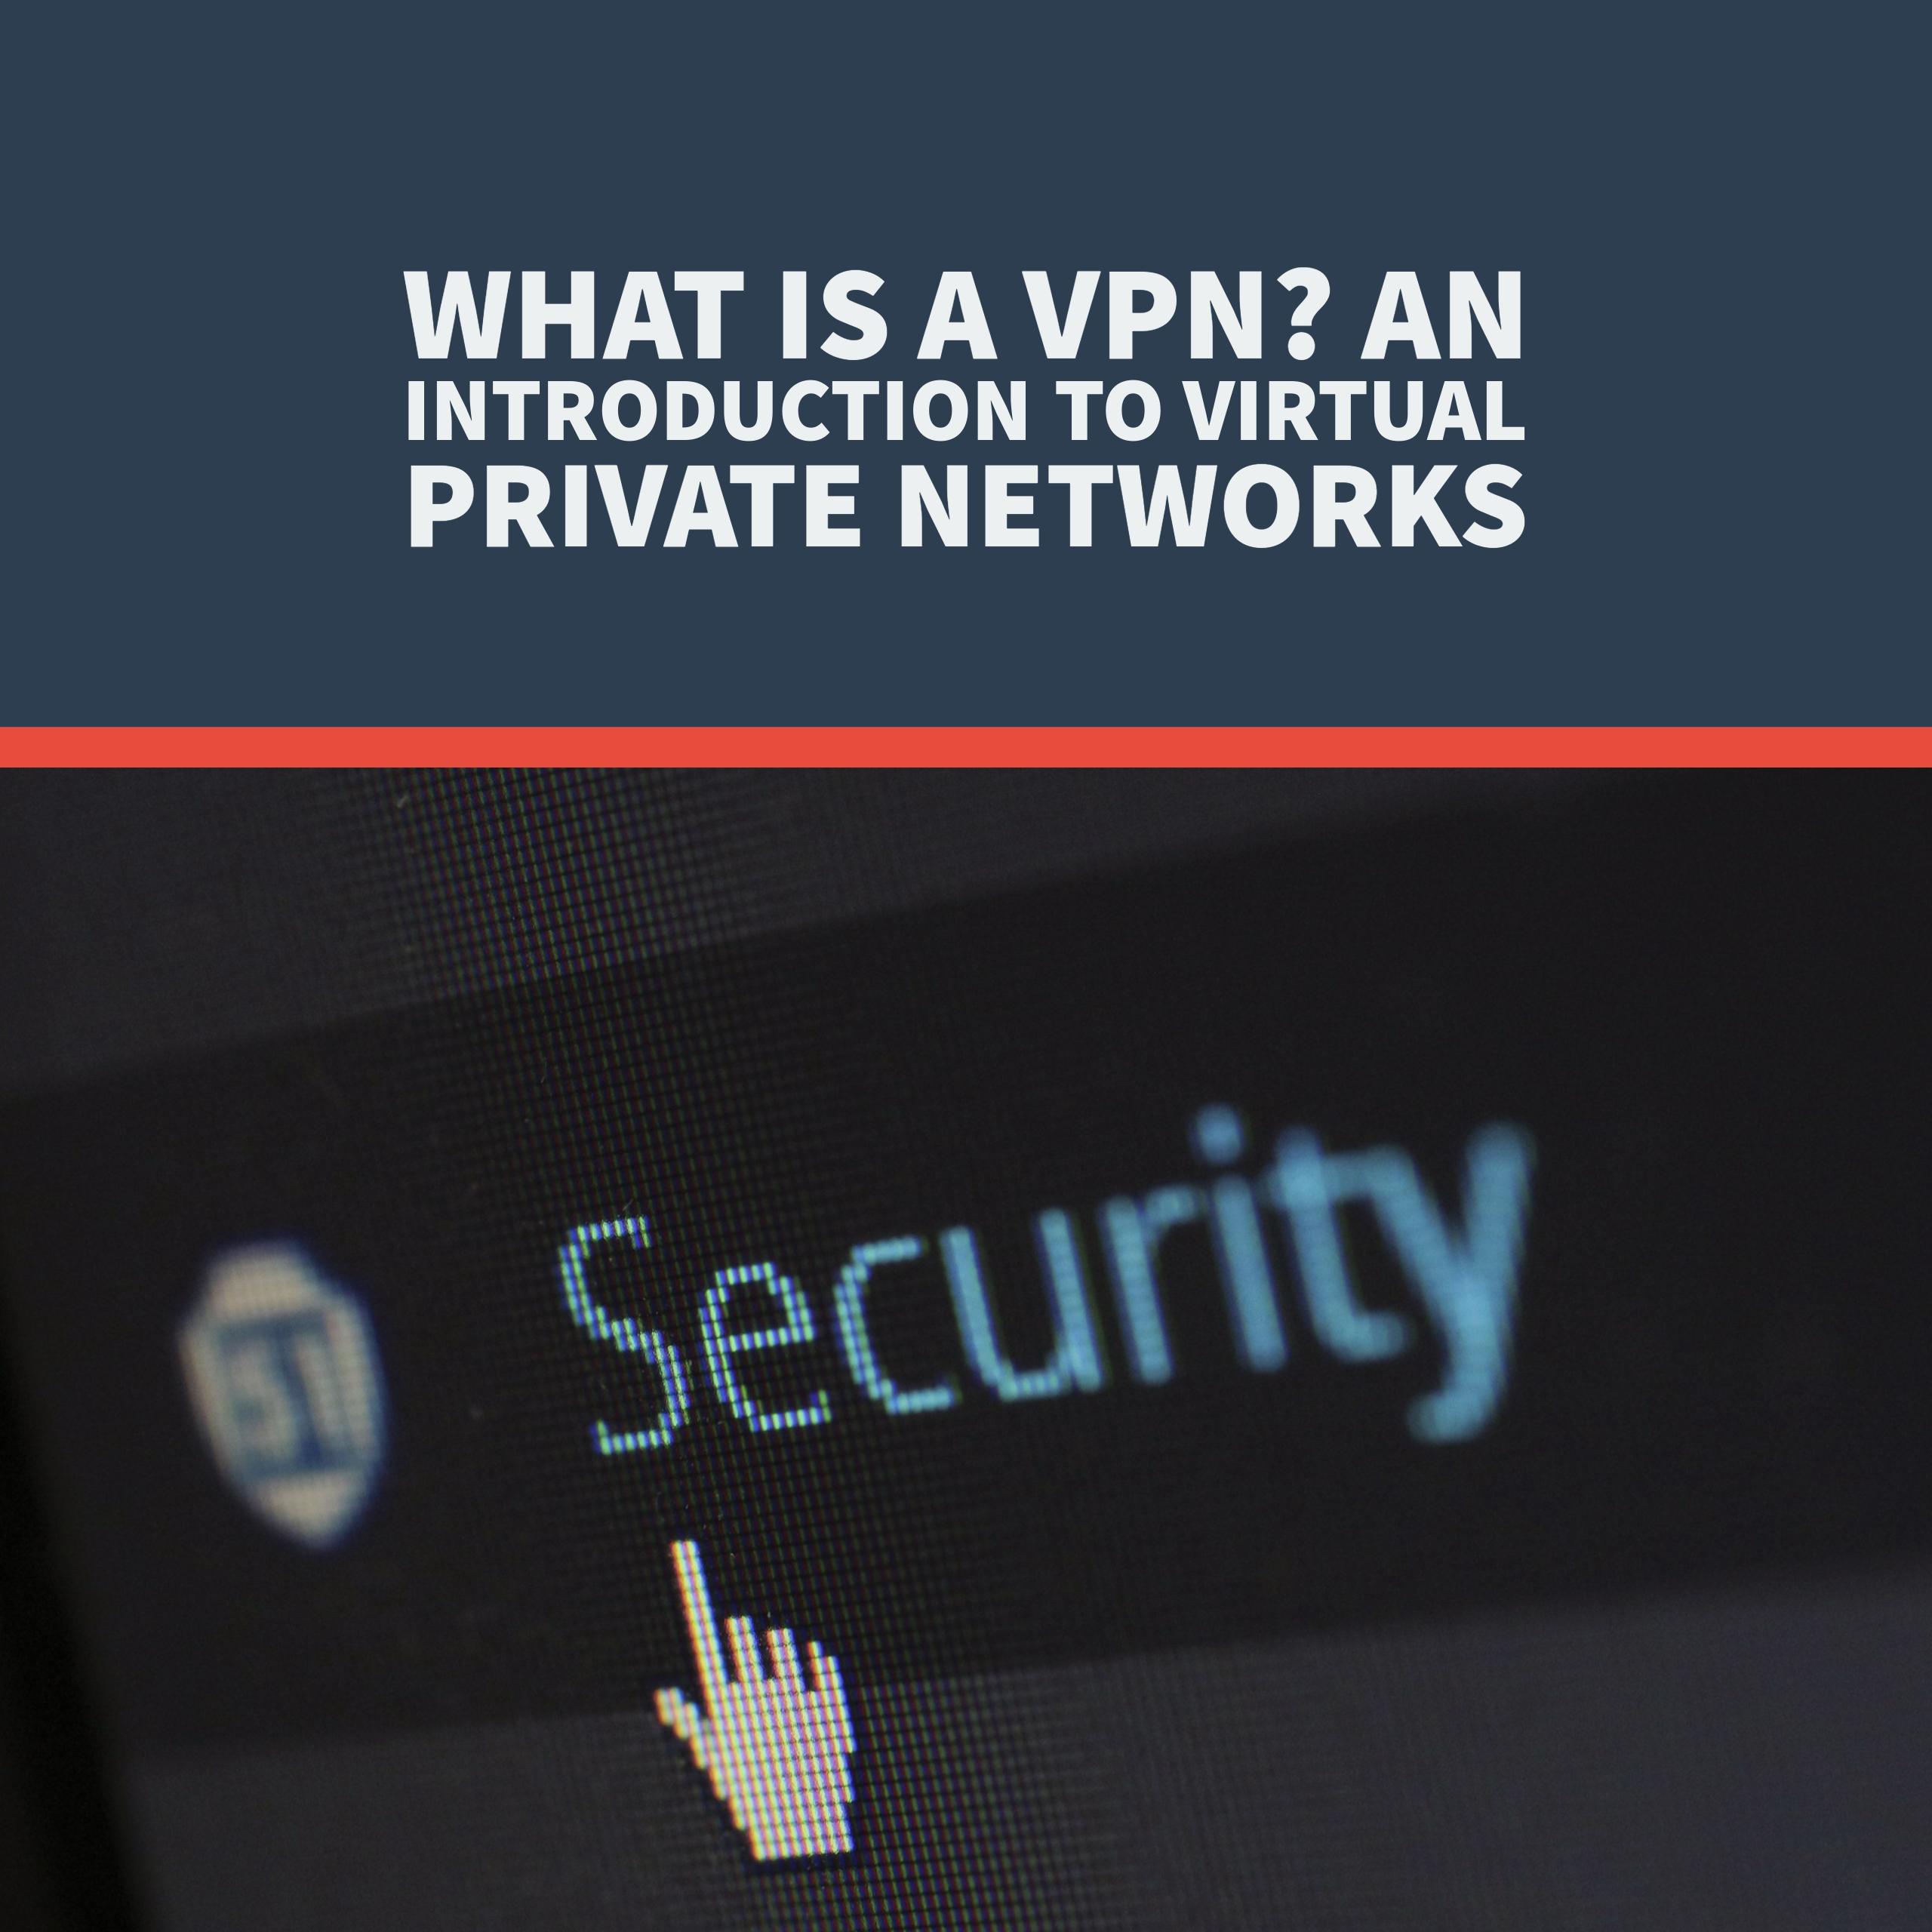 What is a VPN? An introduction to virtual private networks